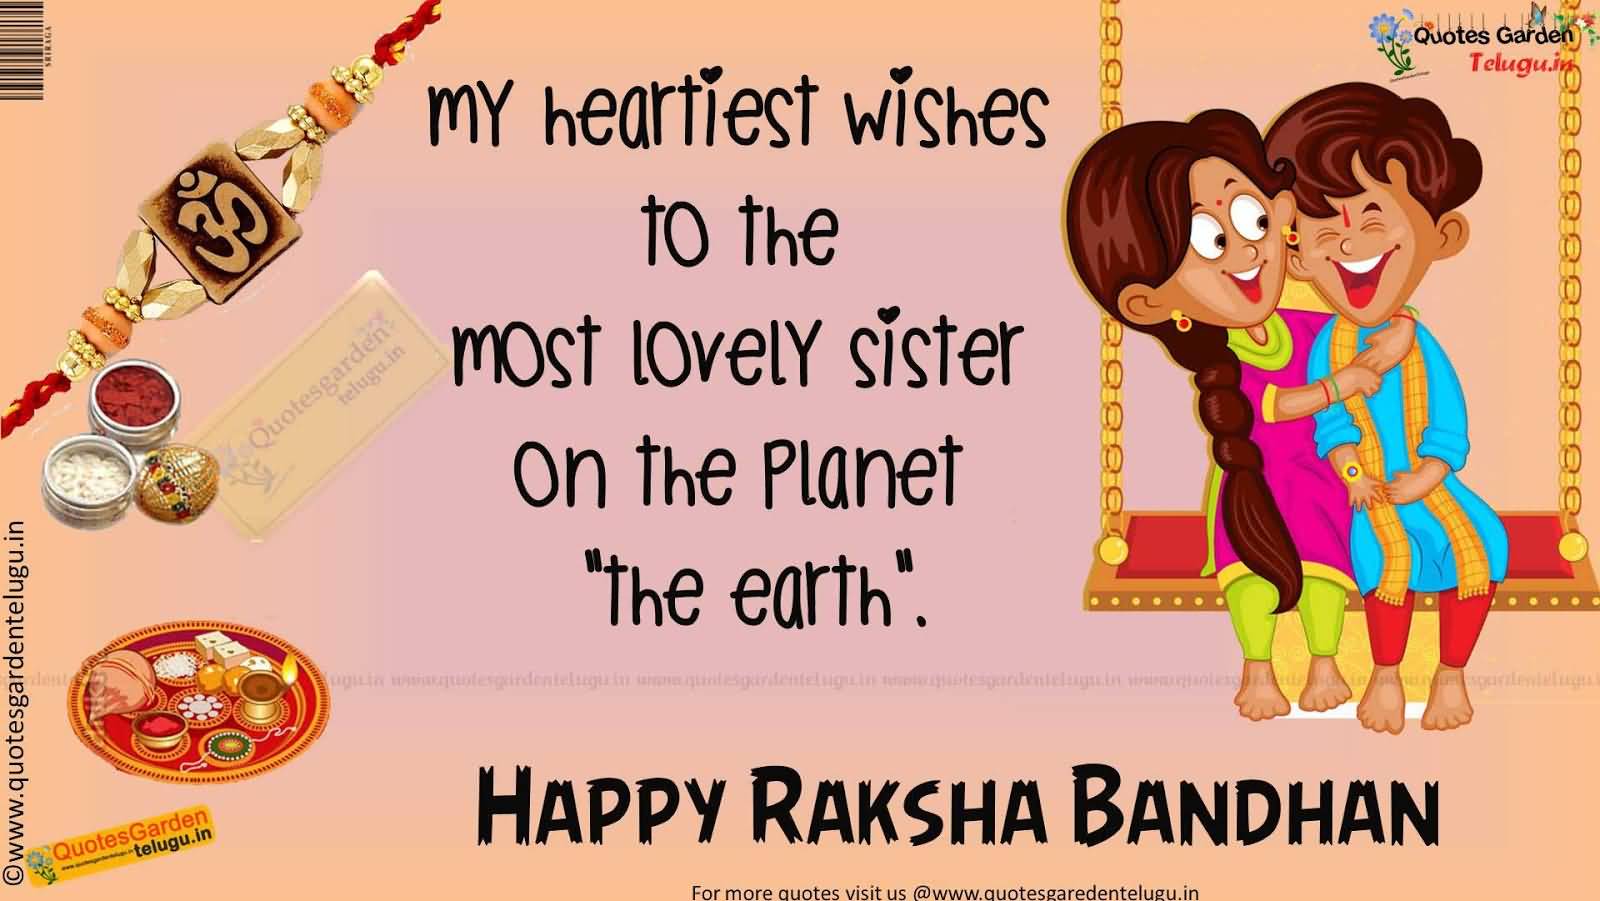 My Heartiest Wishes To The Most Lovely Sister On The Planet The Earth Happy Raksha Bandhan